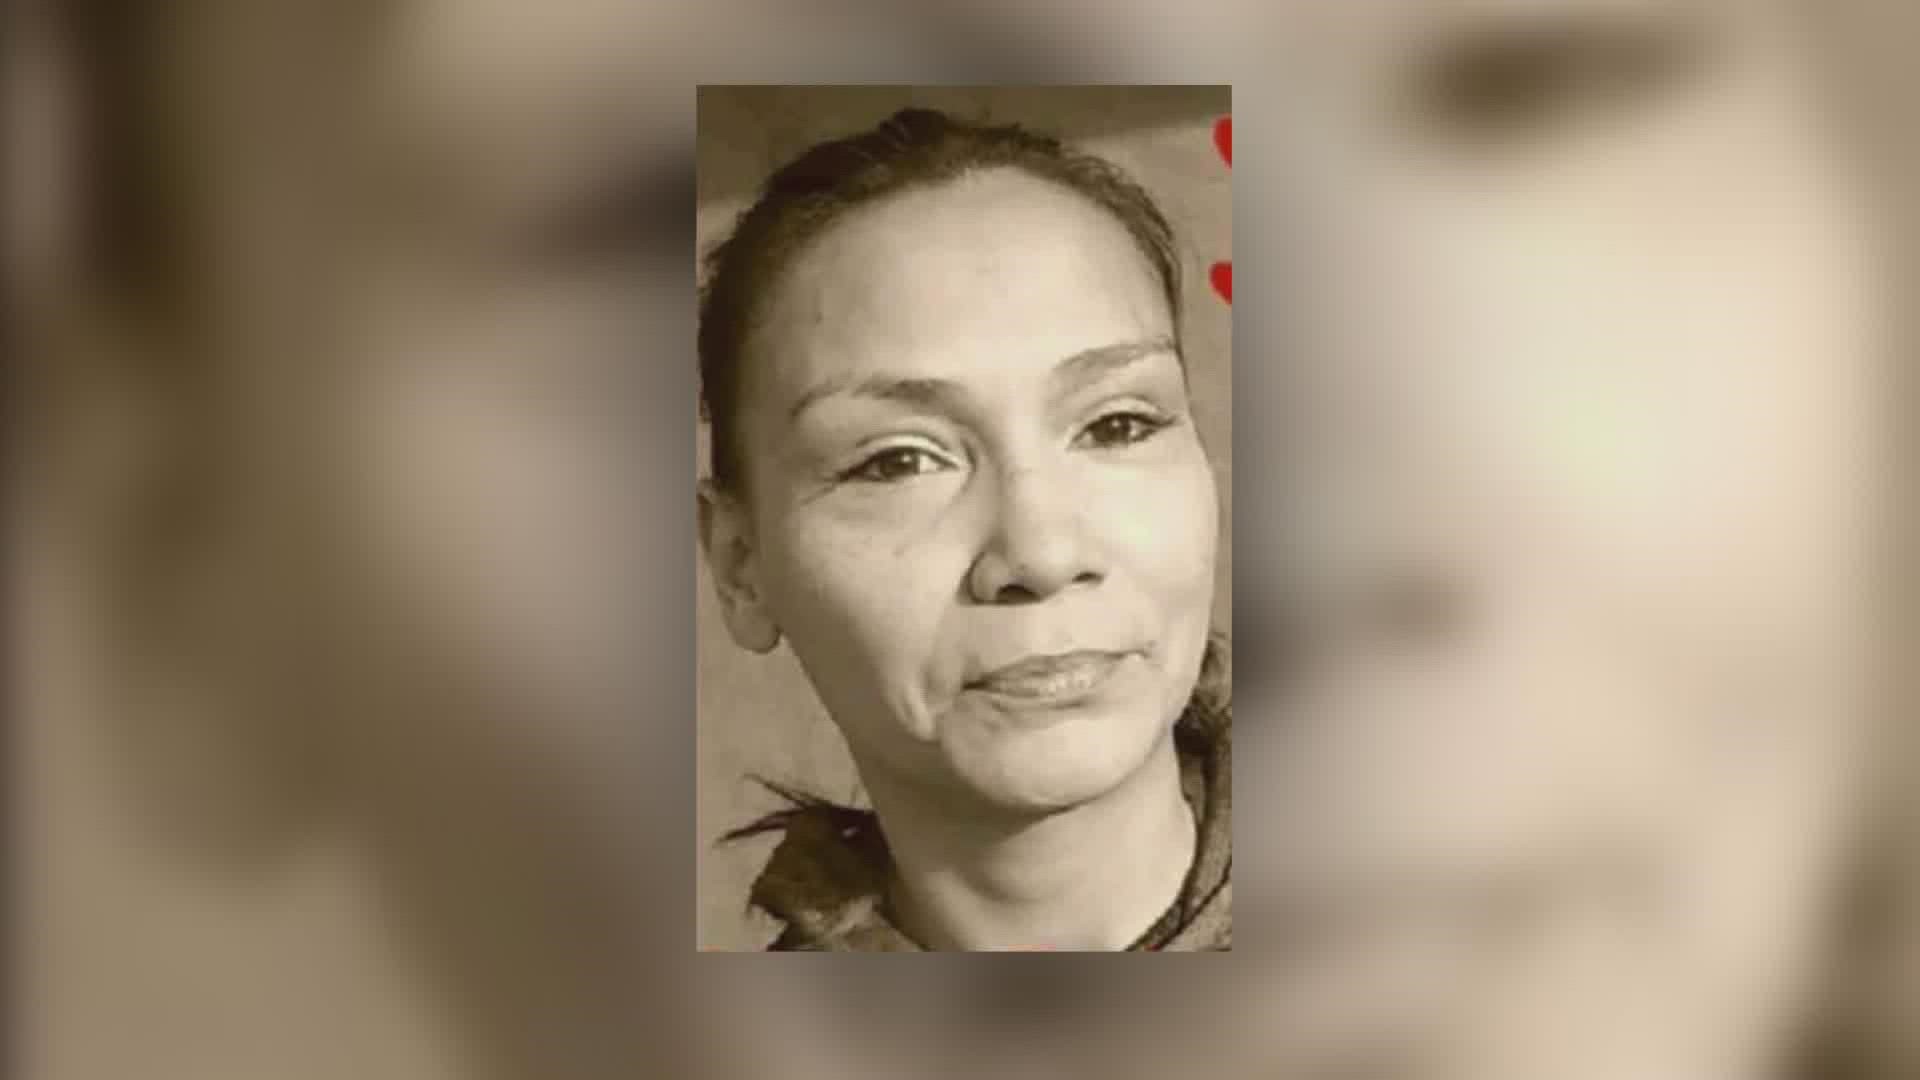 Next week marks one year since Mary Johnson was reported missing from the Tulalip Reservation, and her family is asking anyone who knows something to speak up.